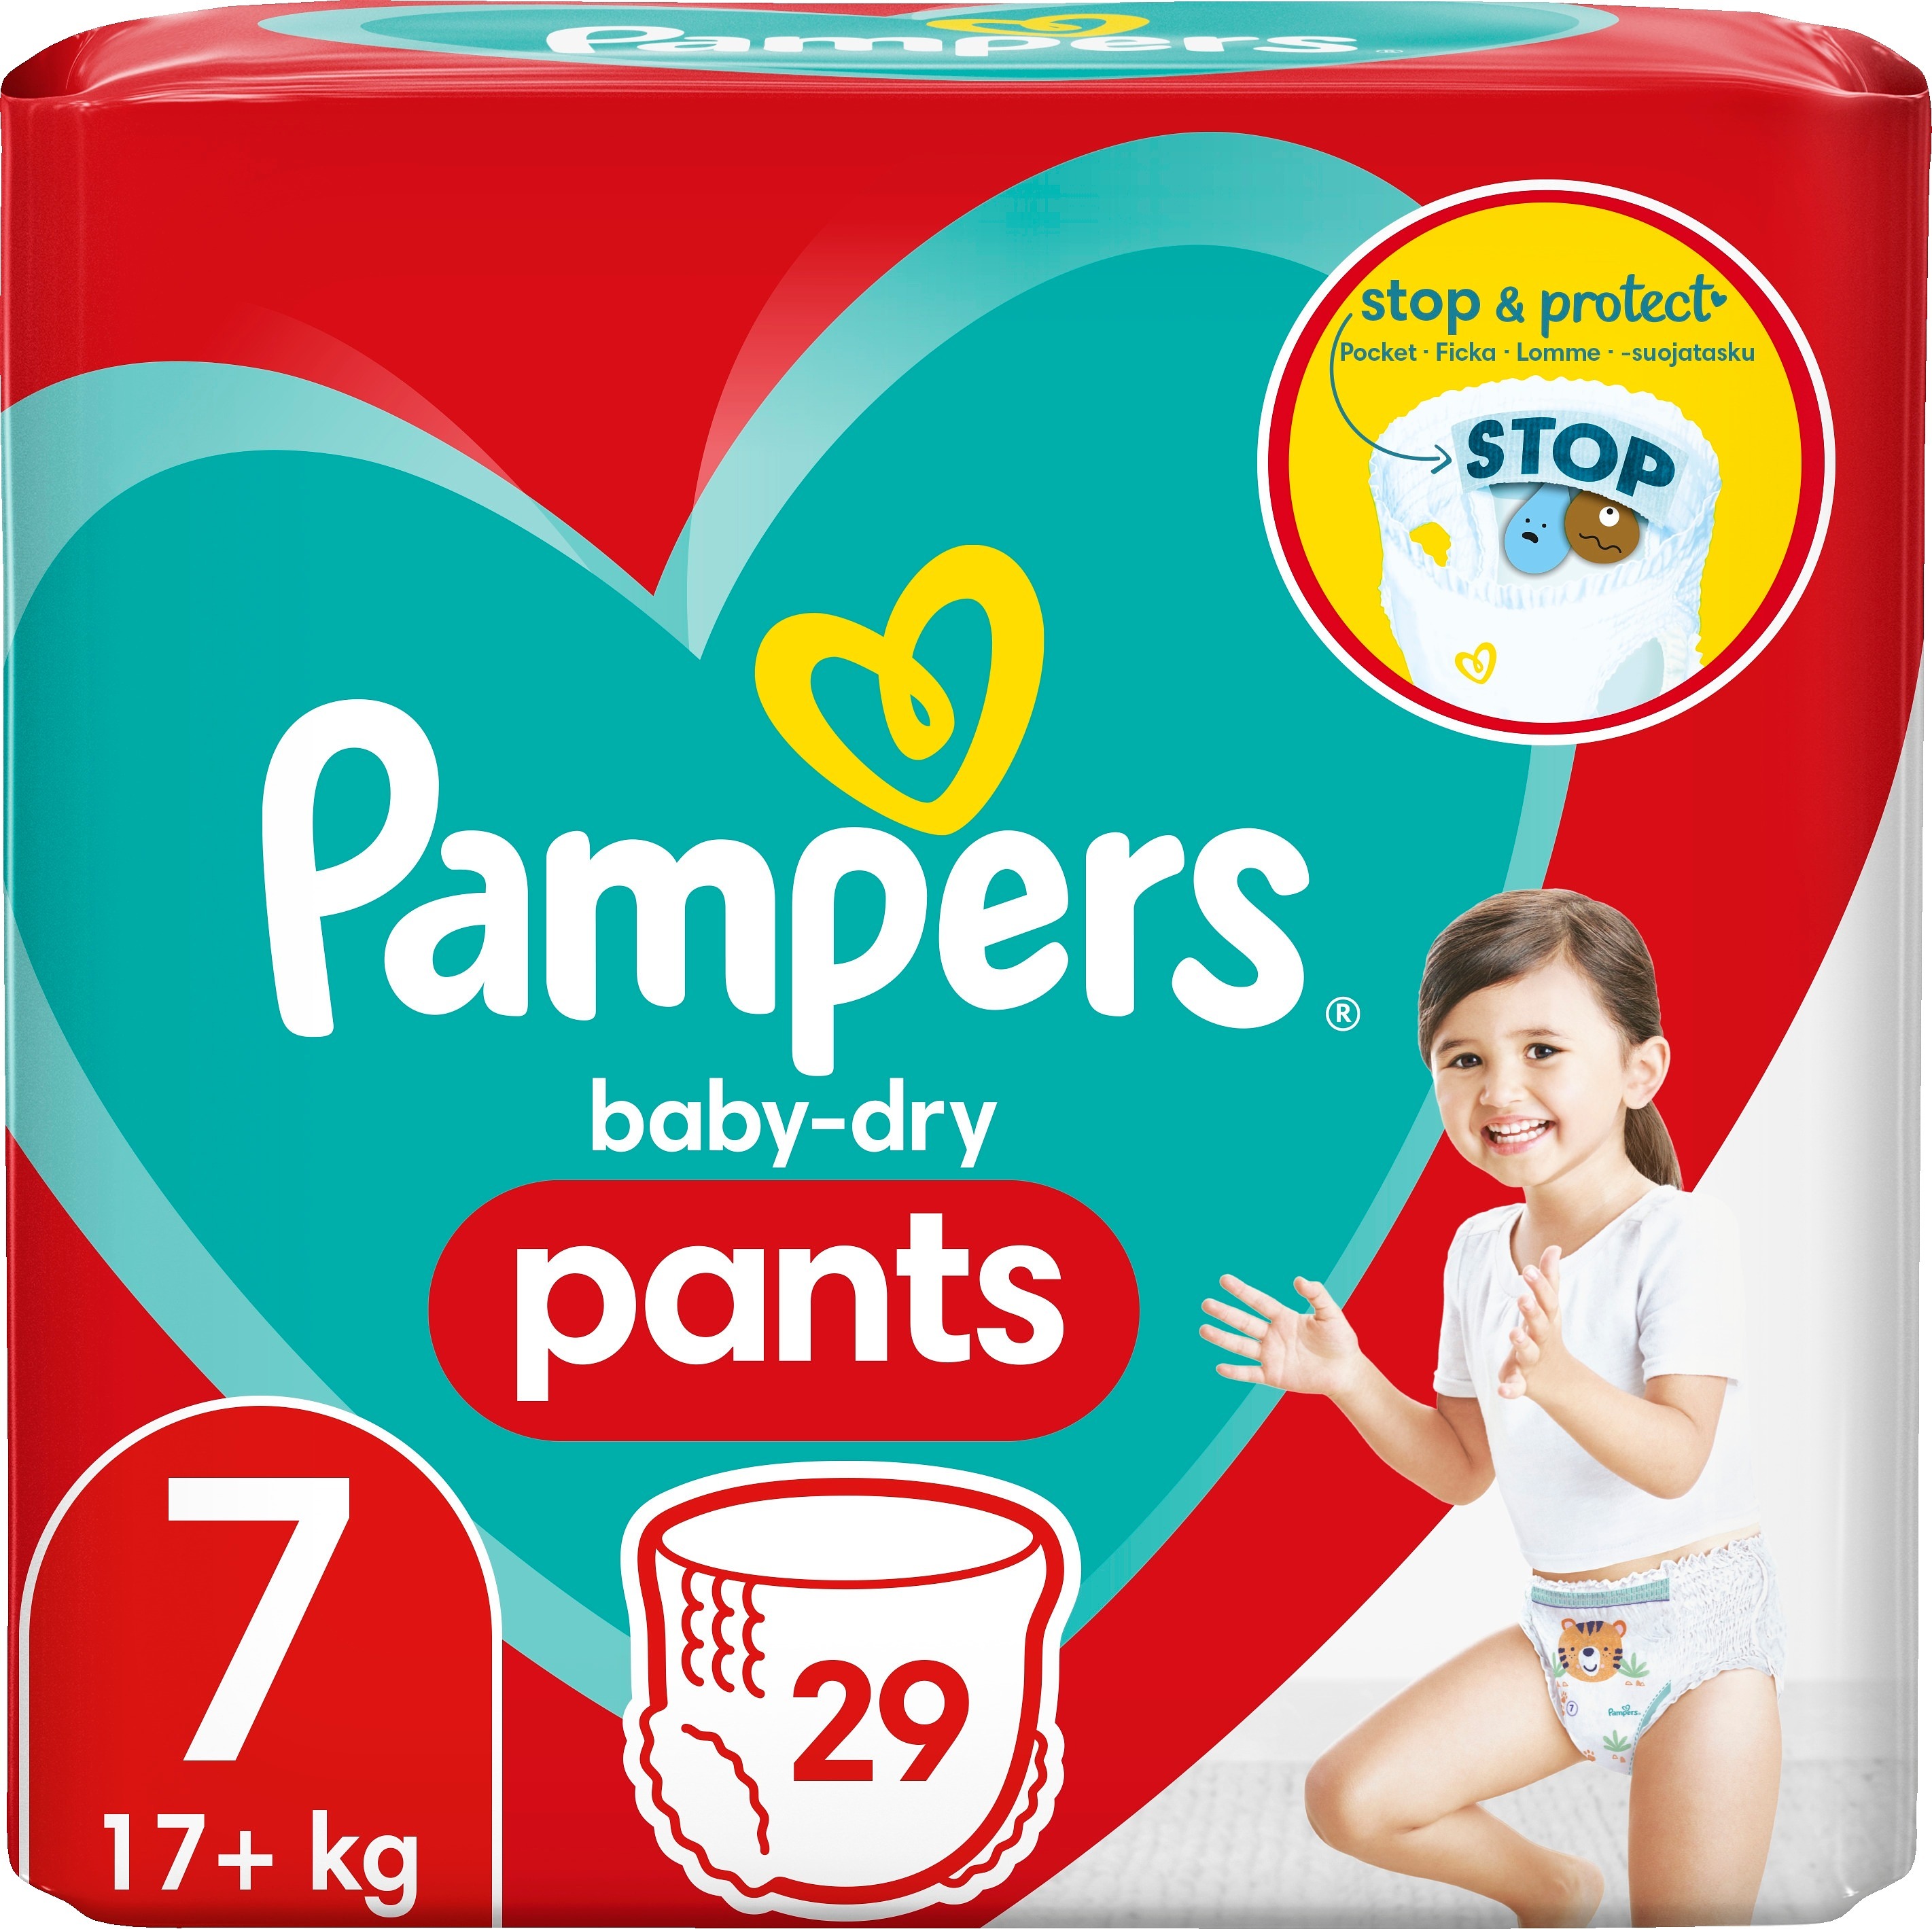 Pampers Baby-dry Pants 7 (17+kg) 29 st